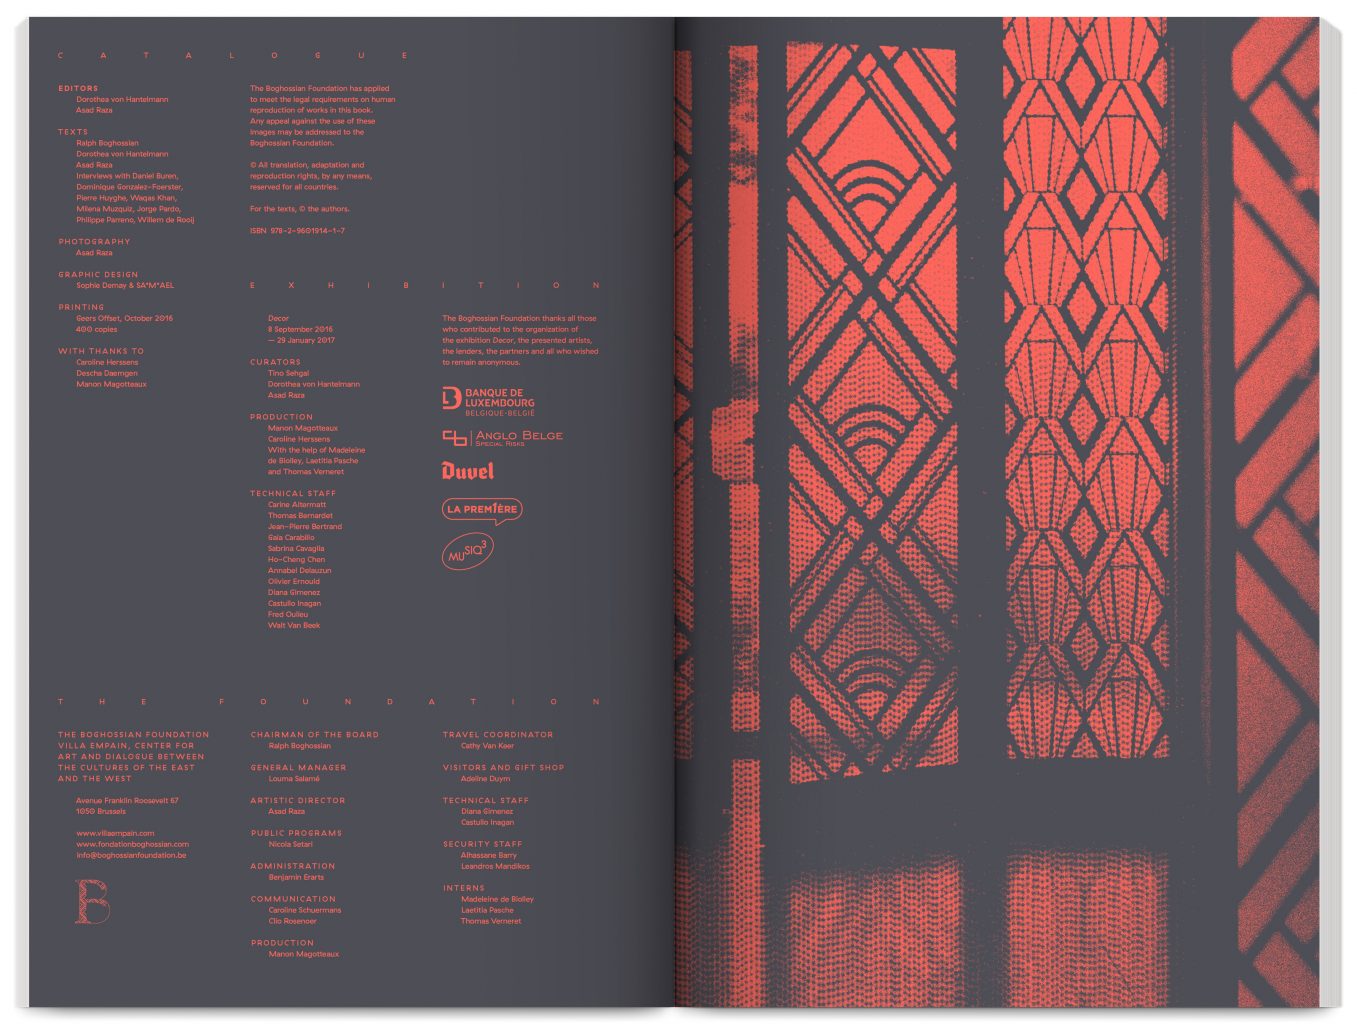 Publication Decor edited by Tino Sehgal, Dorothea von Hantelmann, Asad Raza, published by Villa Empain Fondation Boghossian, designed by In the shade of a tree studio, founded by Sophie Demay and Maël Fournier Comte.